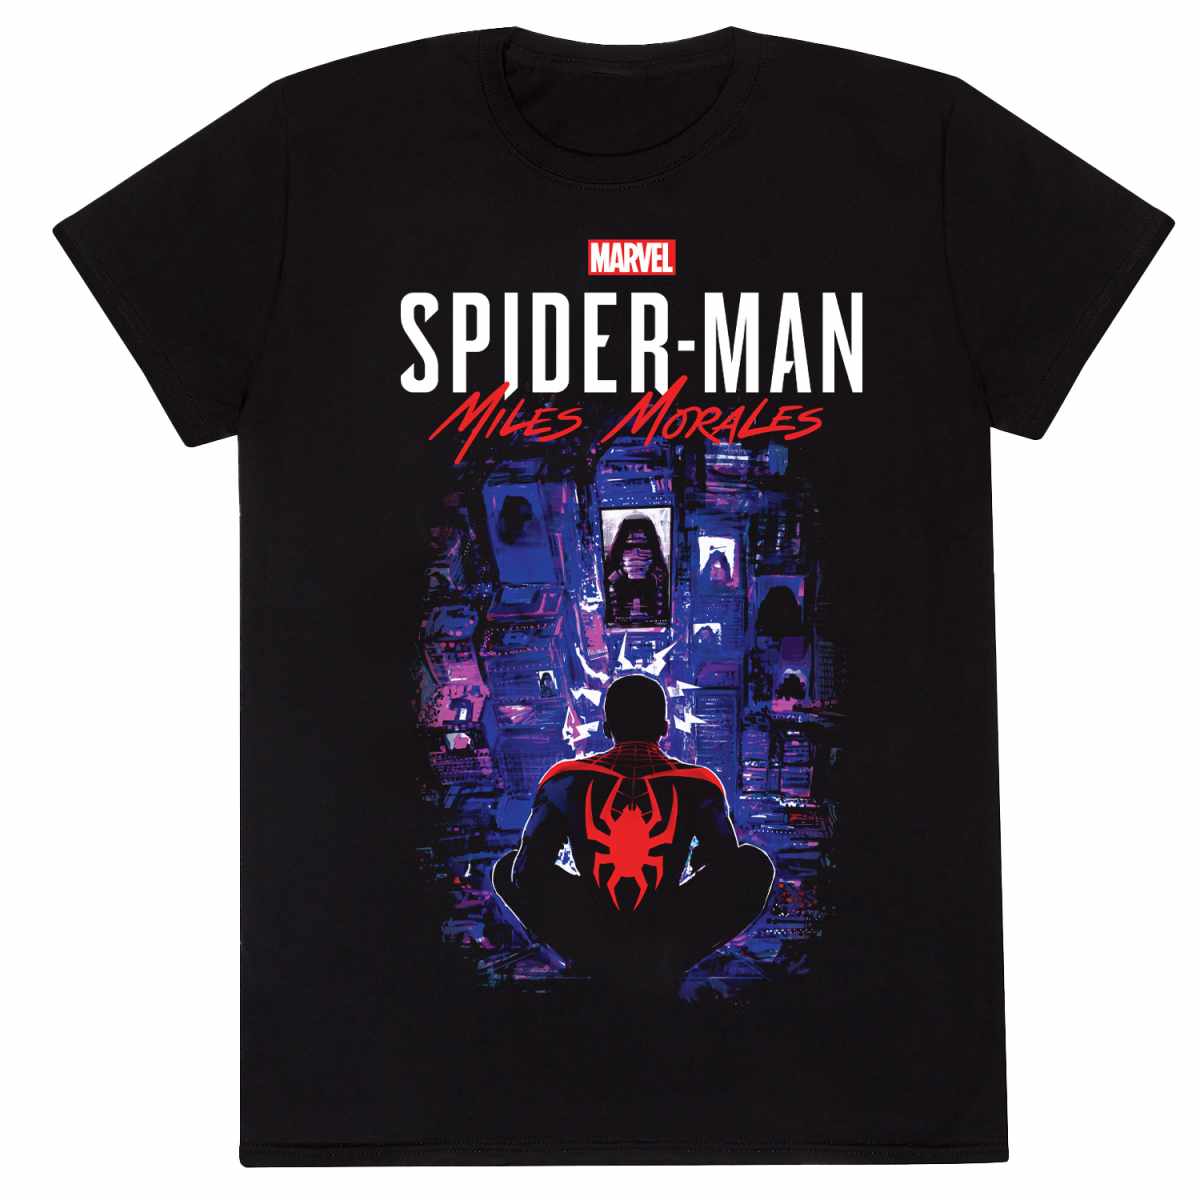 Miles Morales video game t.shirt